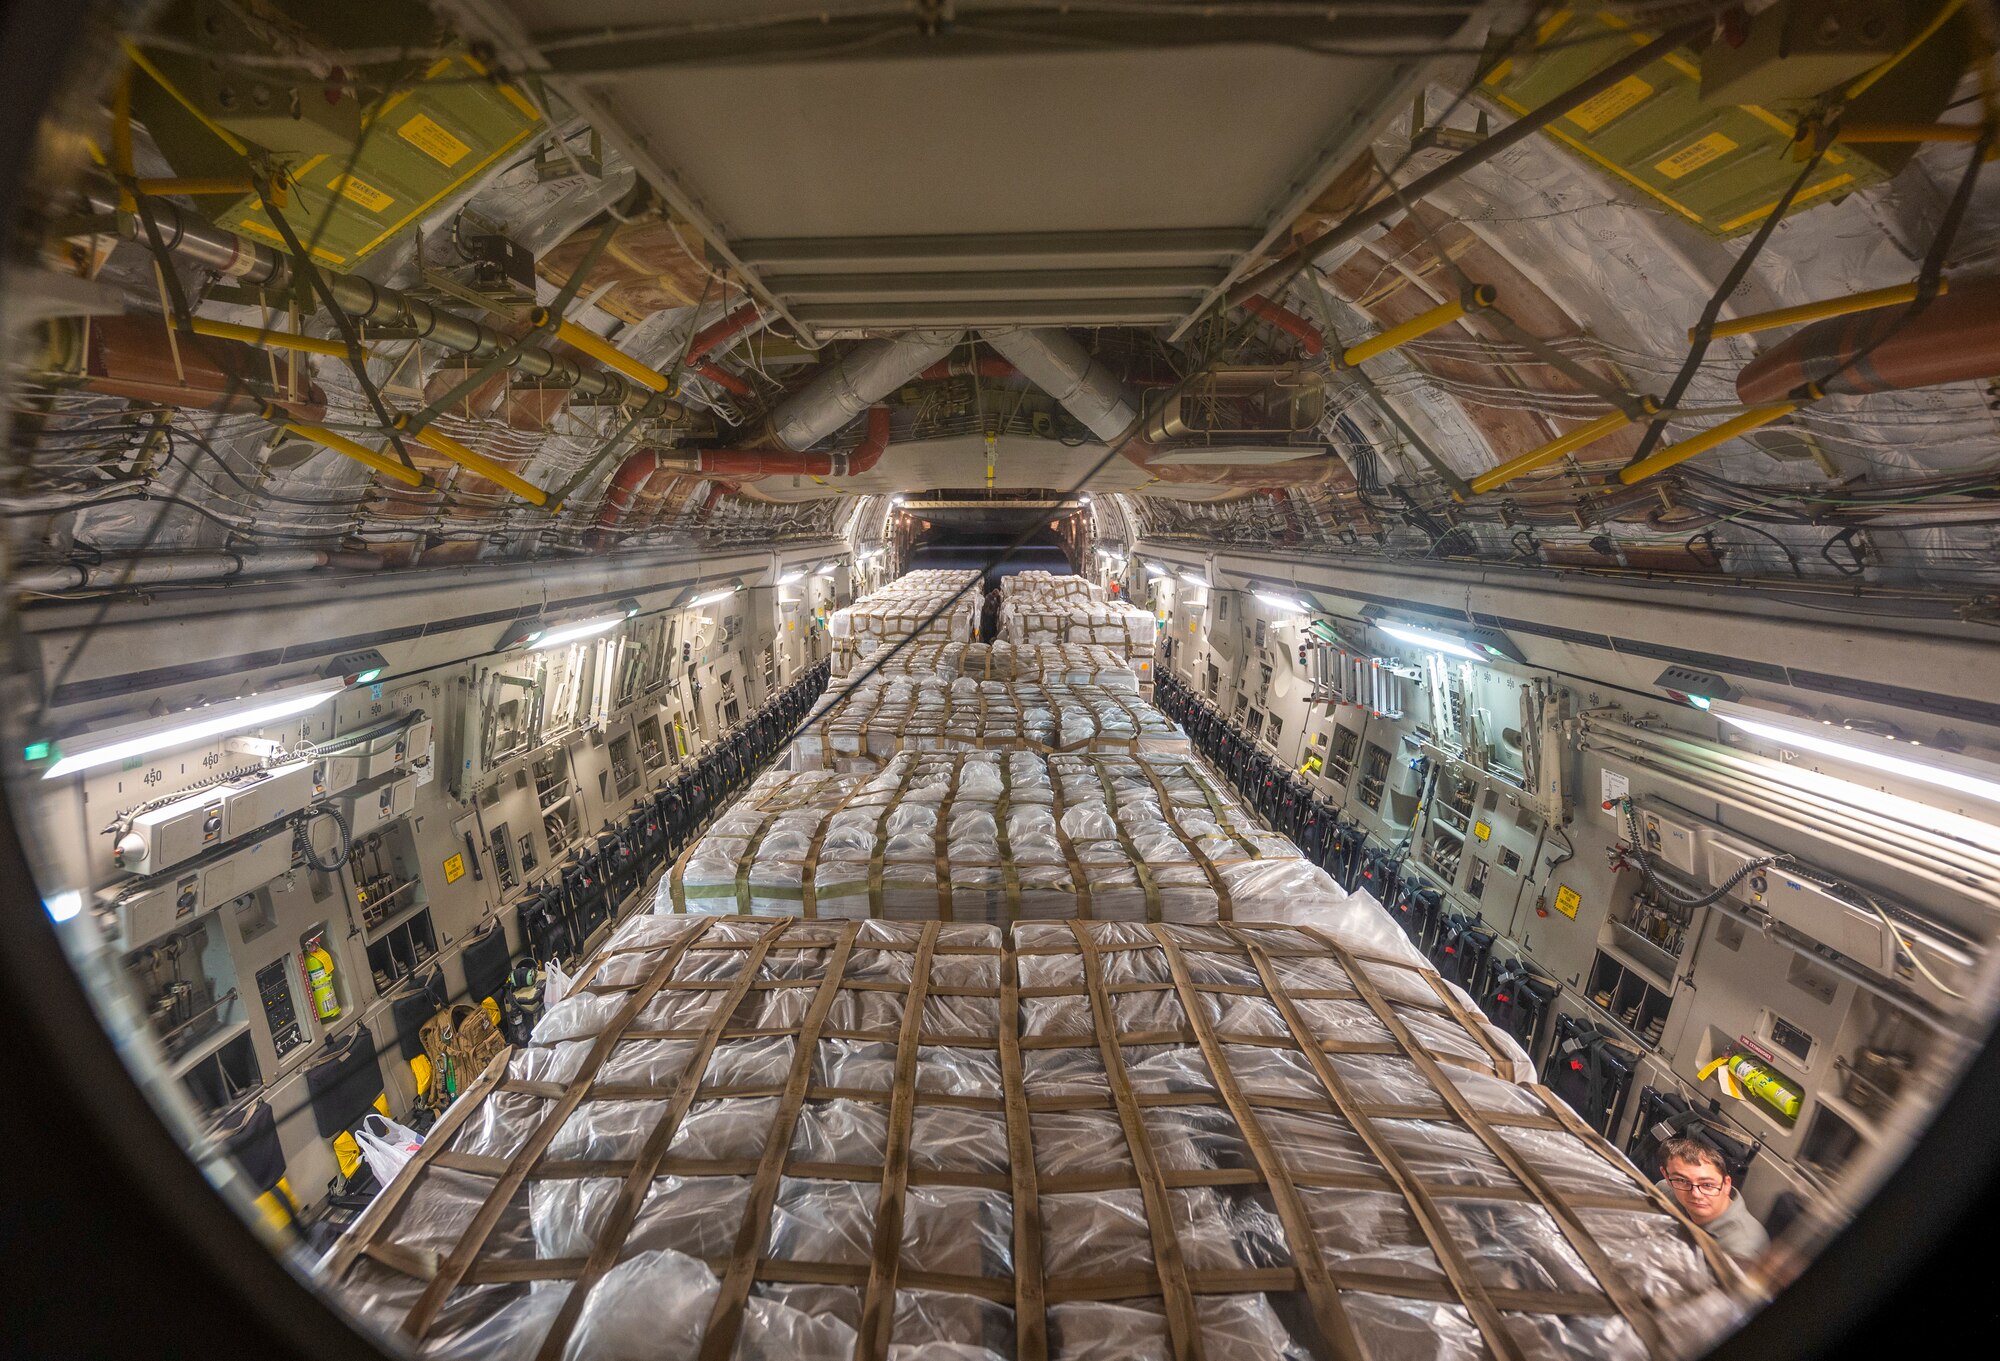 A C-17 Globemaster III assigned to Joint Base Pearl Harbor-Hickam, Hawaii carries pallets of infant formula at Ramstein Air Base, Germany, May 22, 2022. Hundreds of boxes of infant formula arrived from Switzerland and were unloaded, palletized and loaded on a C-17 for transport during Operation Fly Formula, an operation to quickly import infant formula to the United States that meets U.S. health and safety standards. (U.S. Air Force photo by Staff Sgt. Jacob Wongwai)